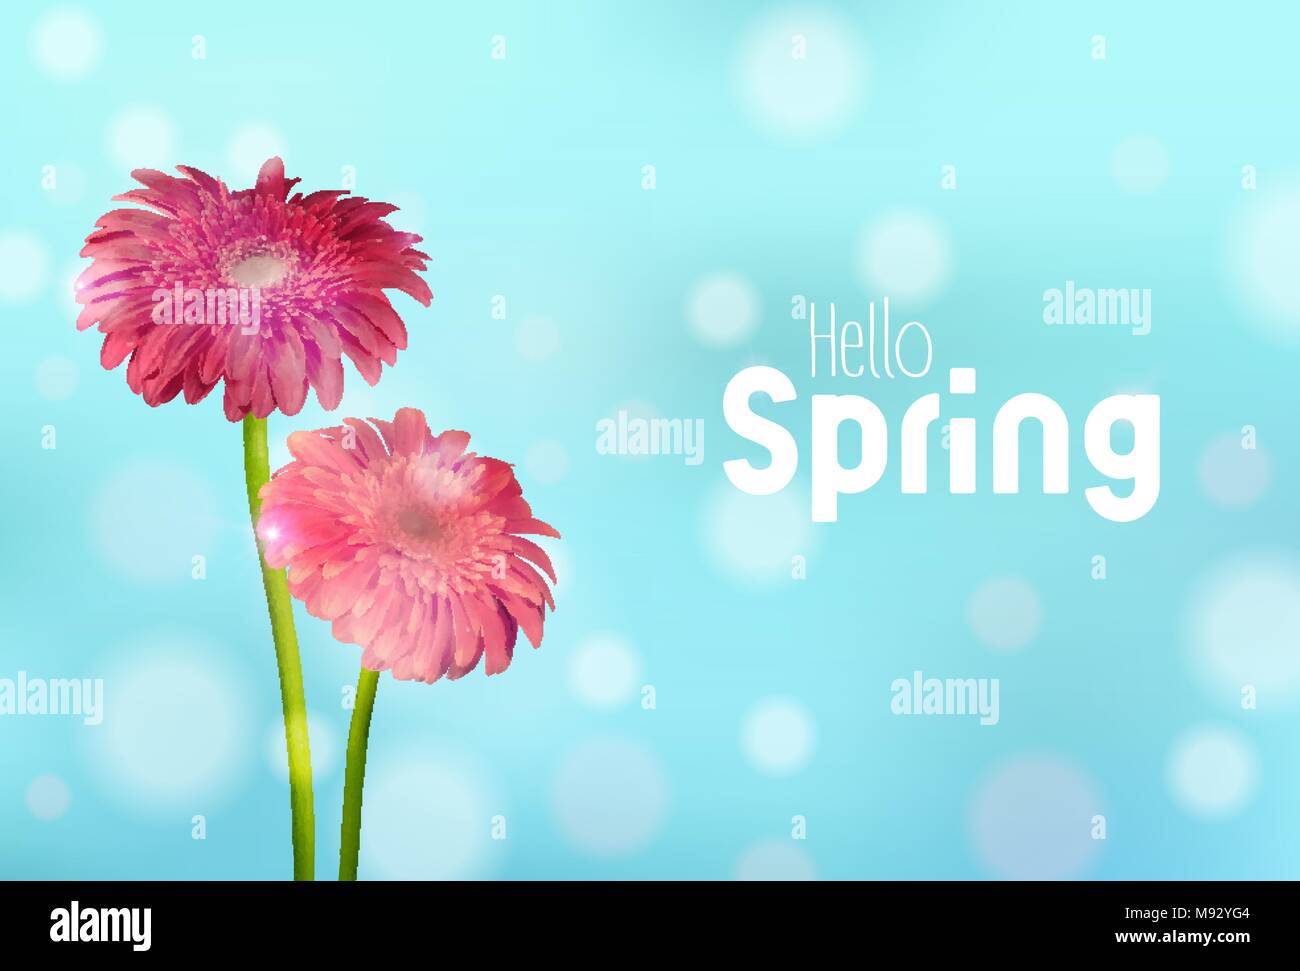 Hello Spring greeting card illustration with pink daisy flowers and blue sky background. EPS10 vector. Stock Vector